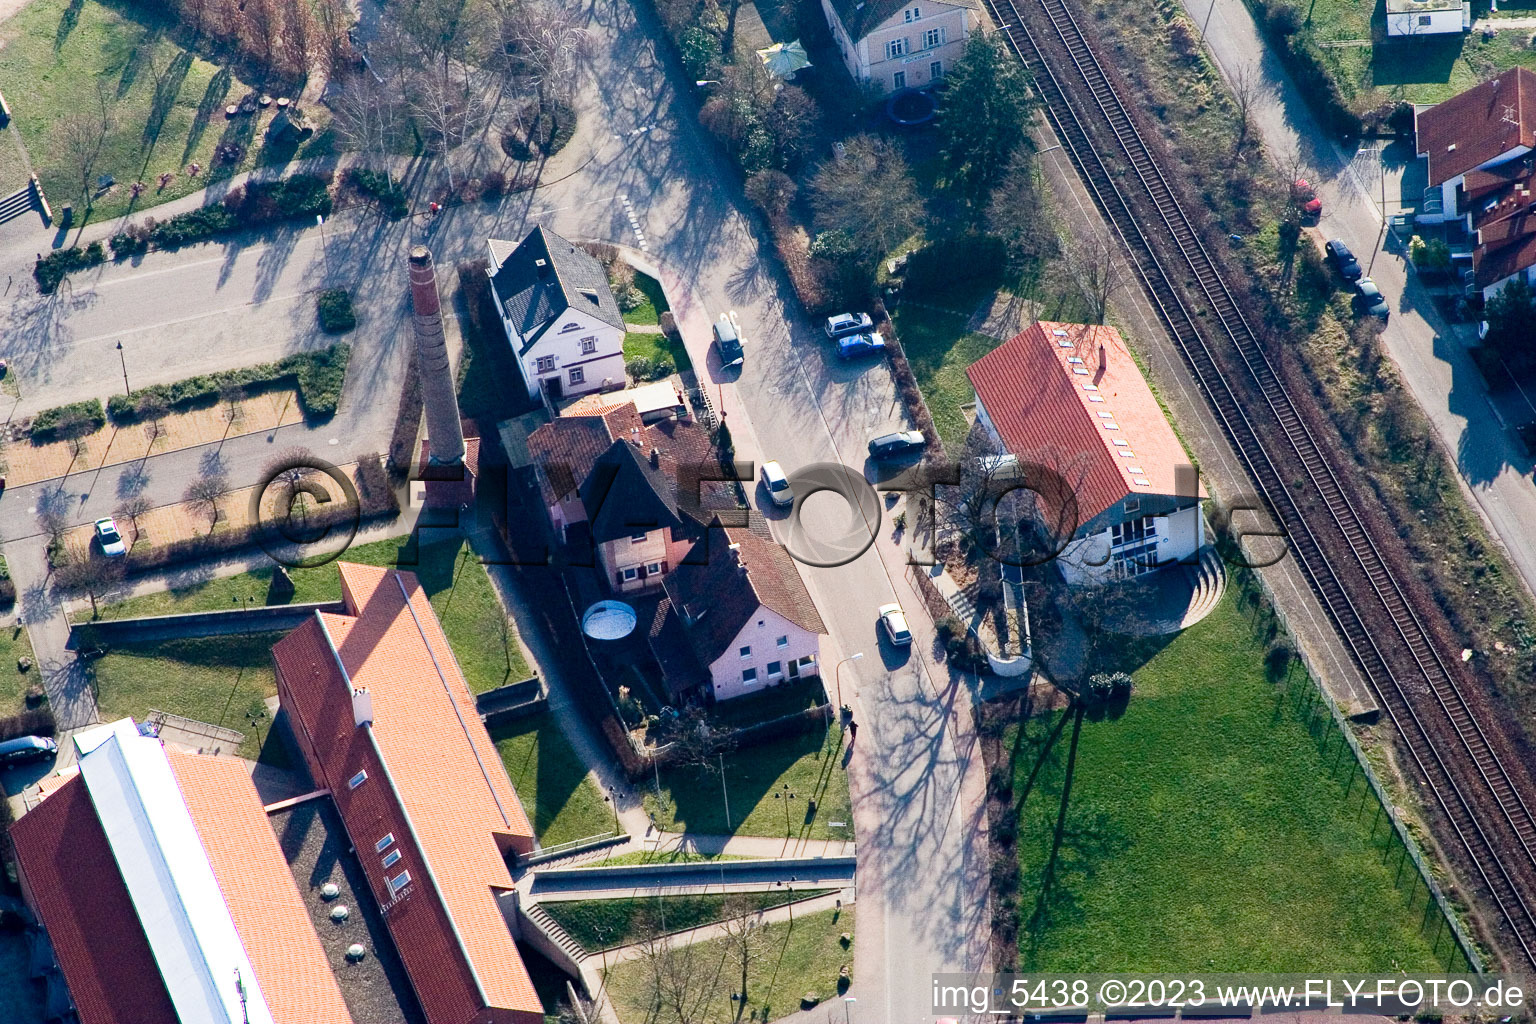 Aerial view of At the train station in Jockgrim in the state Rhineland-Palatinate, Germany